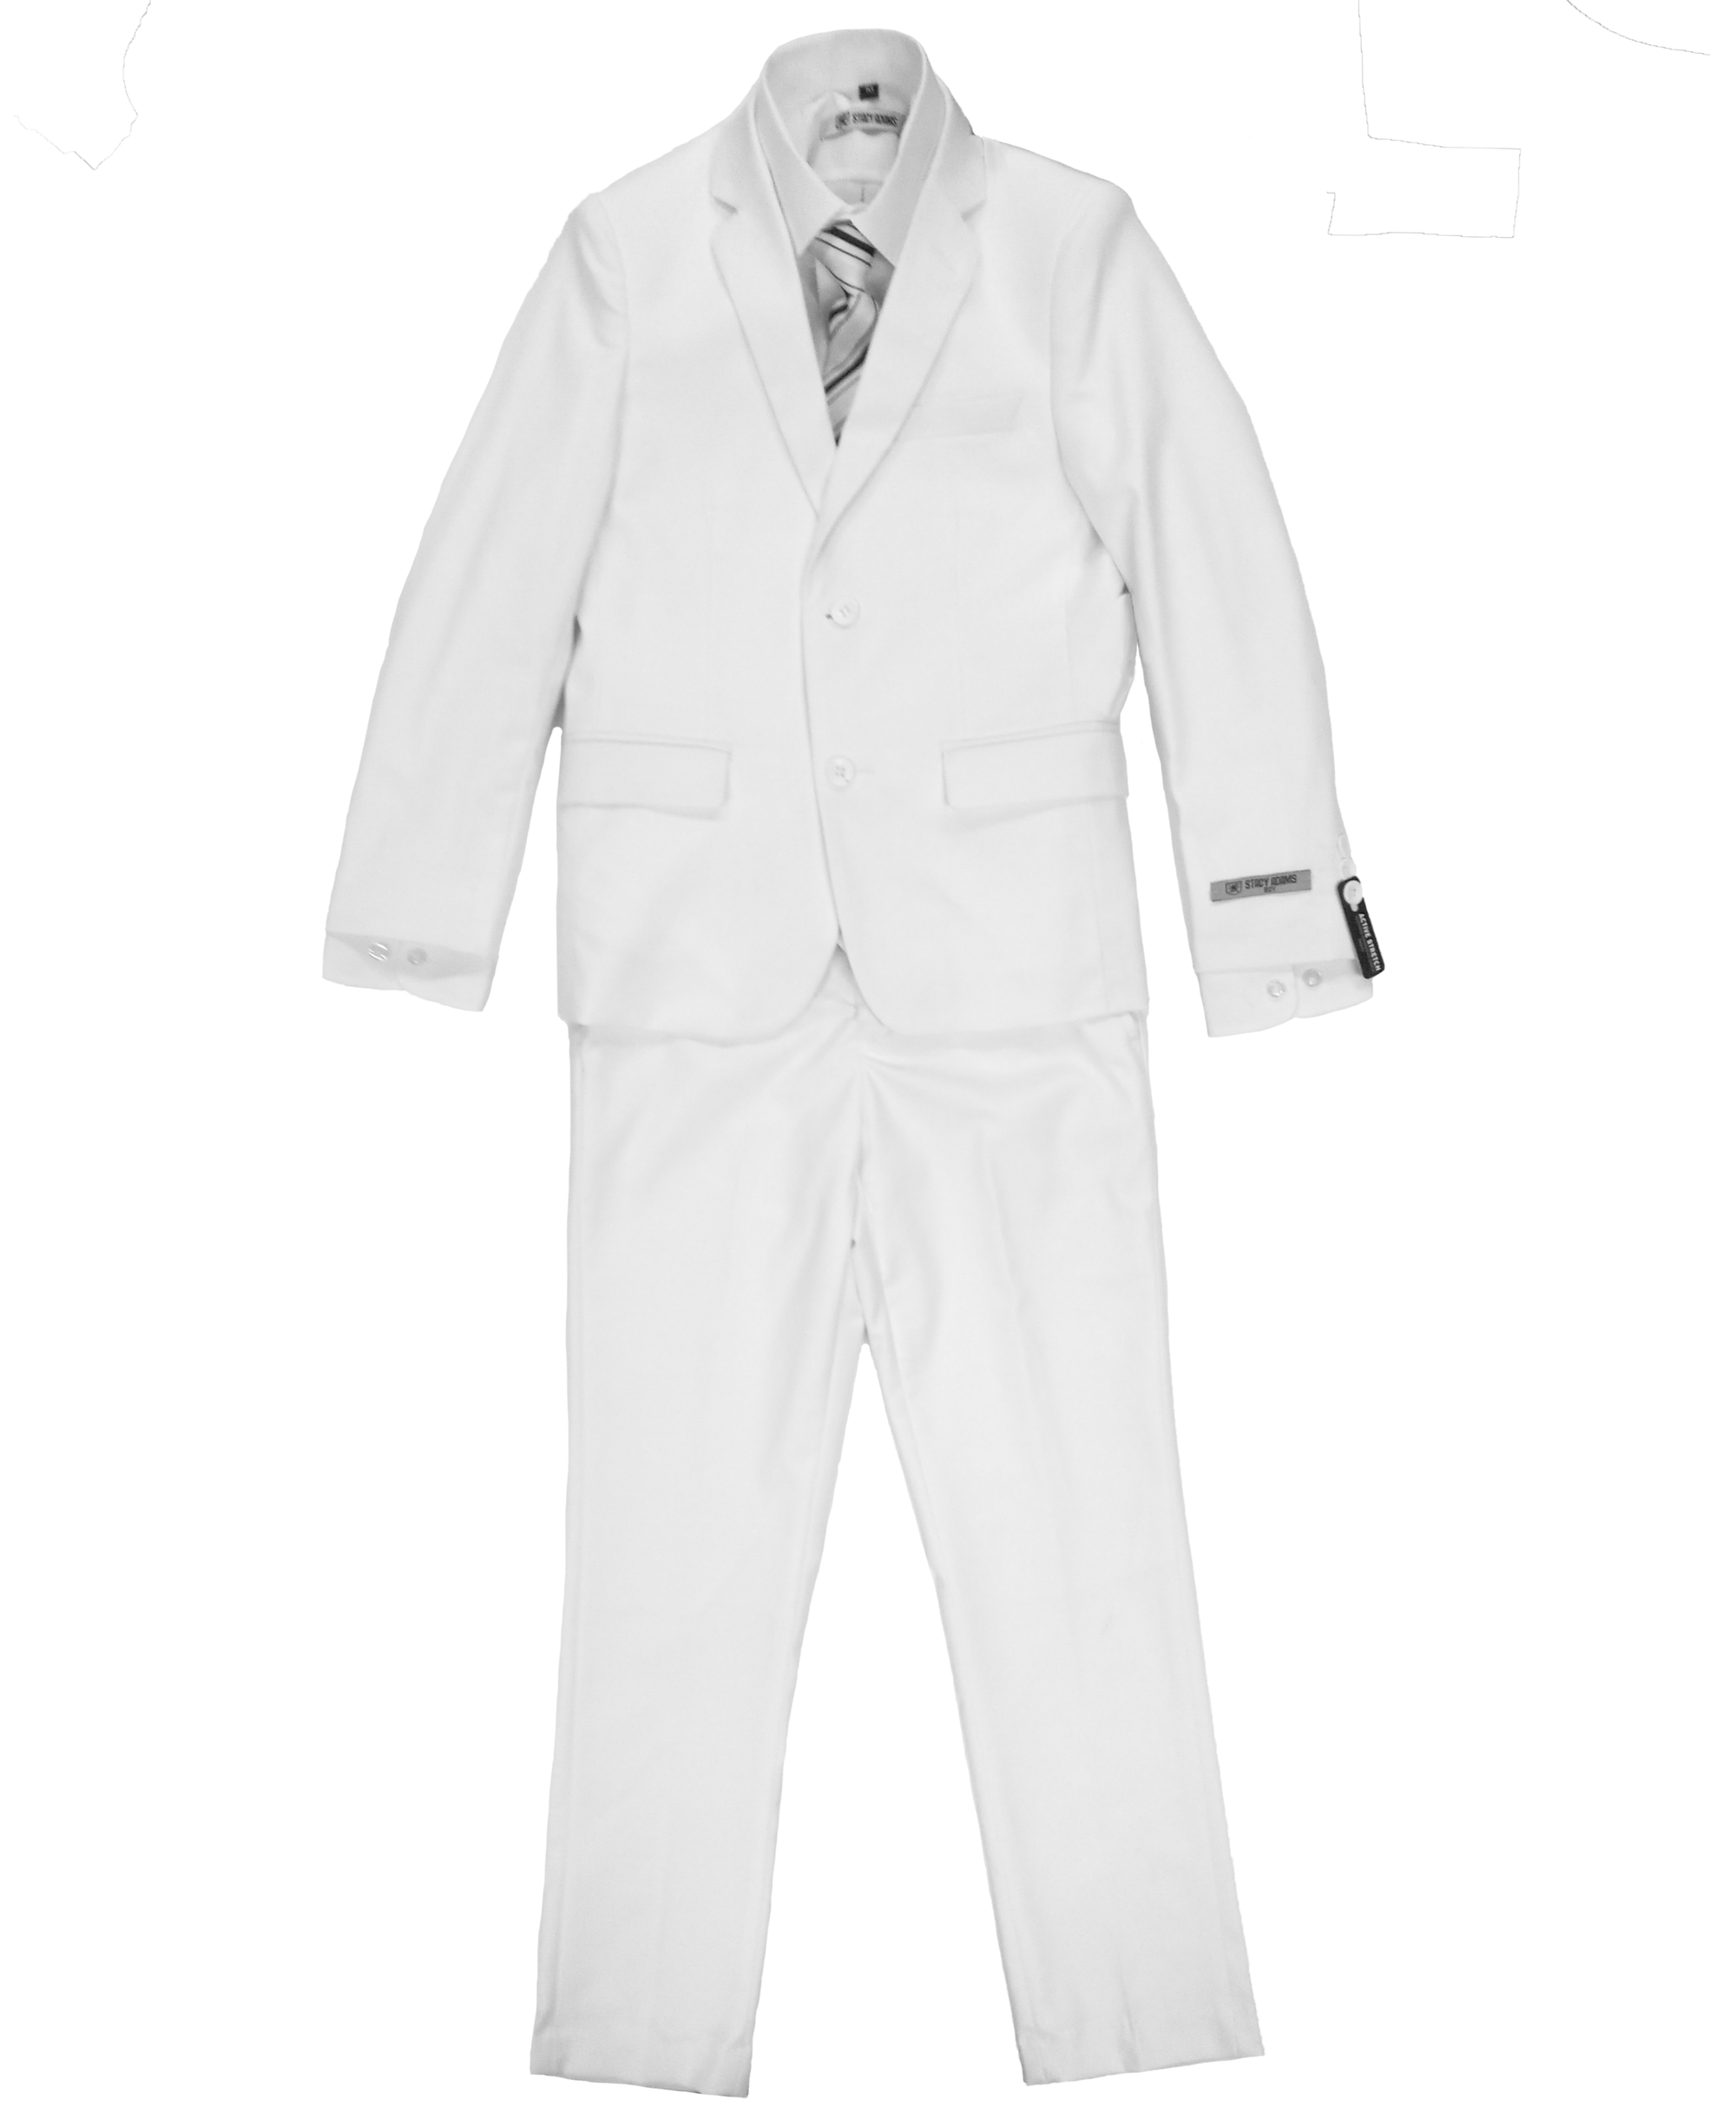 Boys Stacy Adams White 5 pc Suits